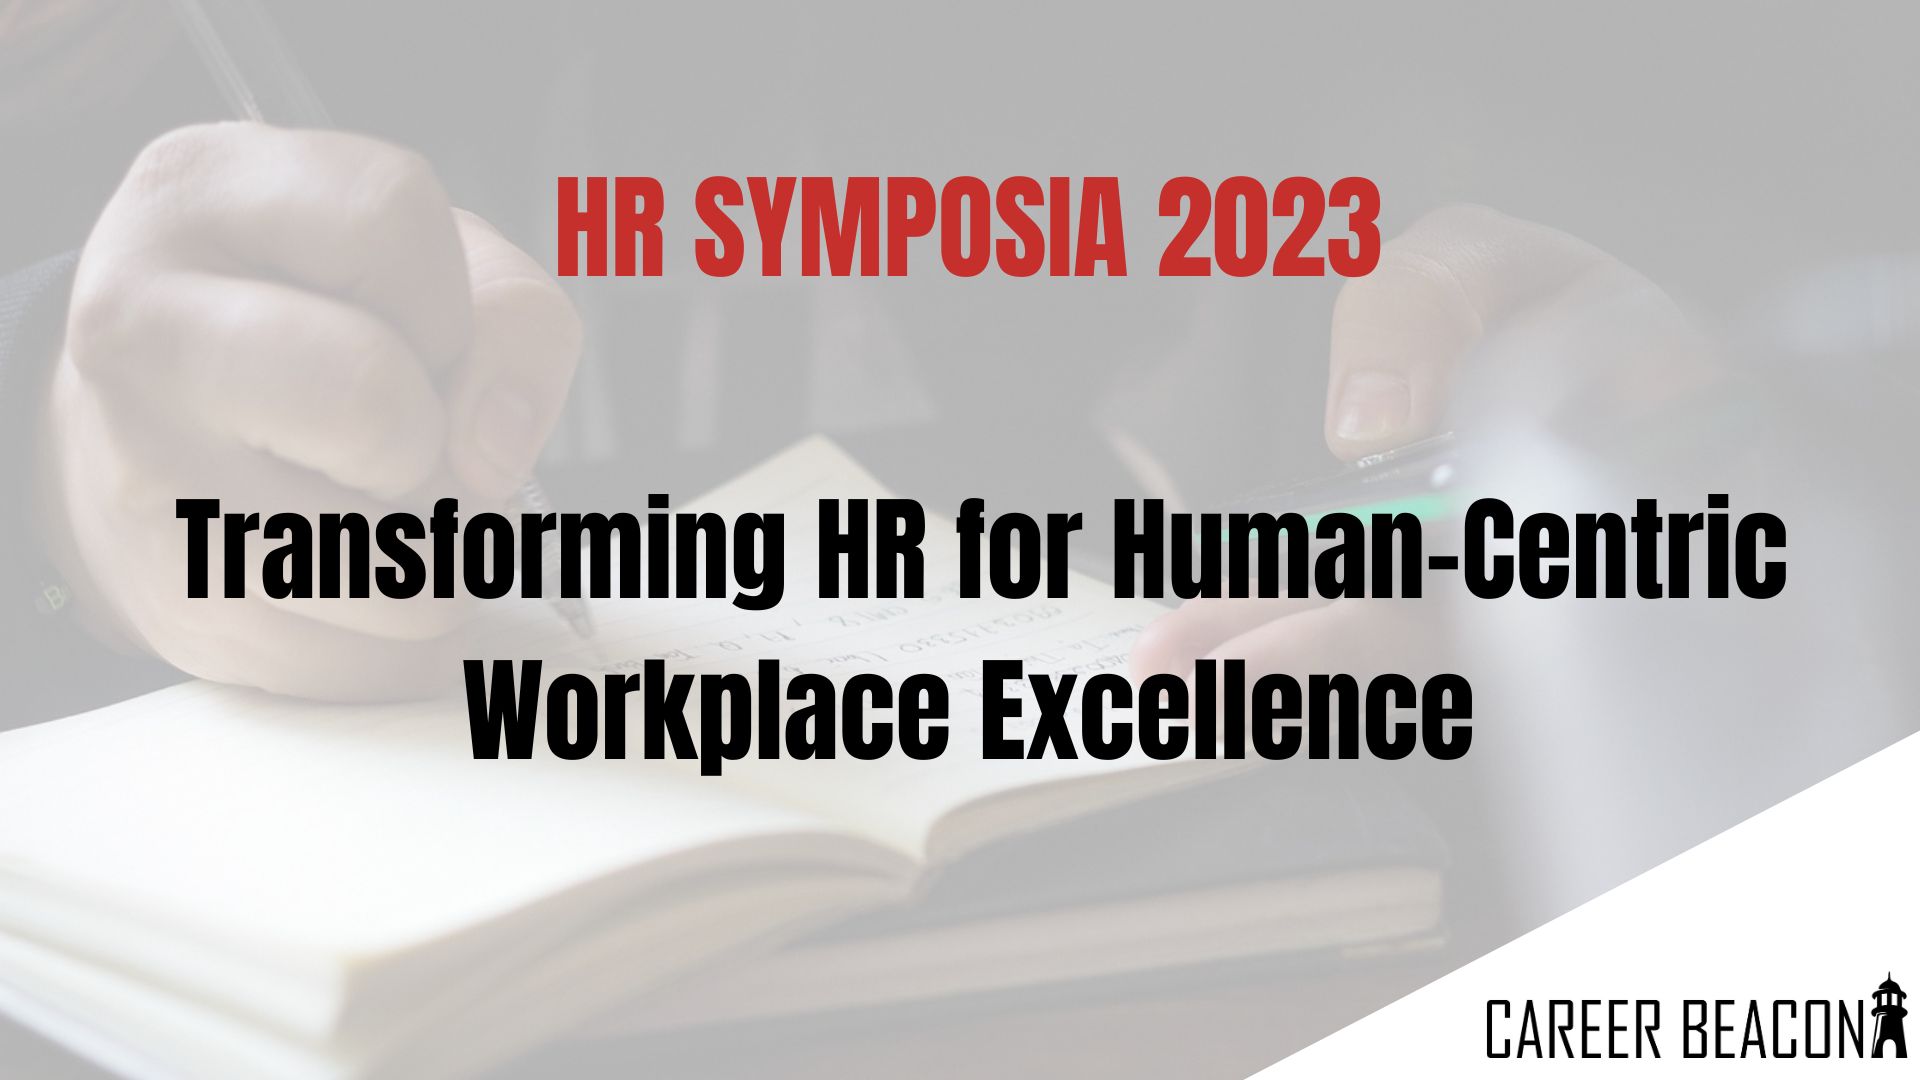 HR SYMPOSIA 2023: Transforming HR for Human-Centric Workplace Excellence